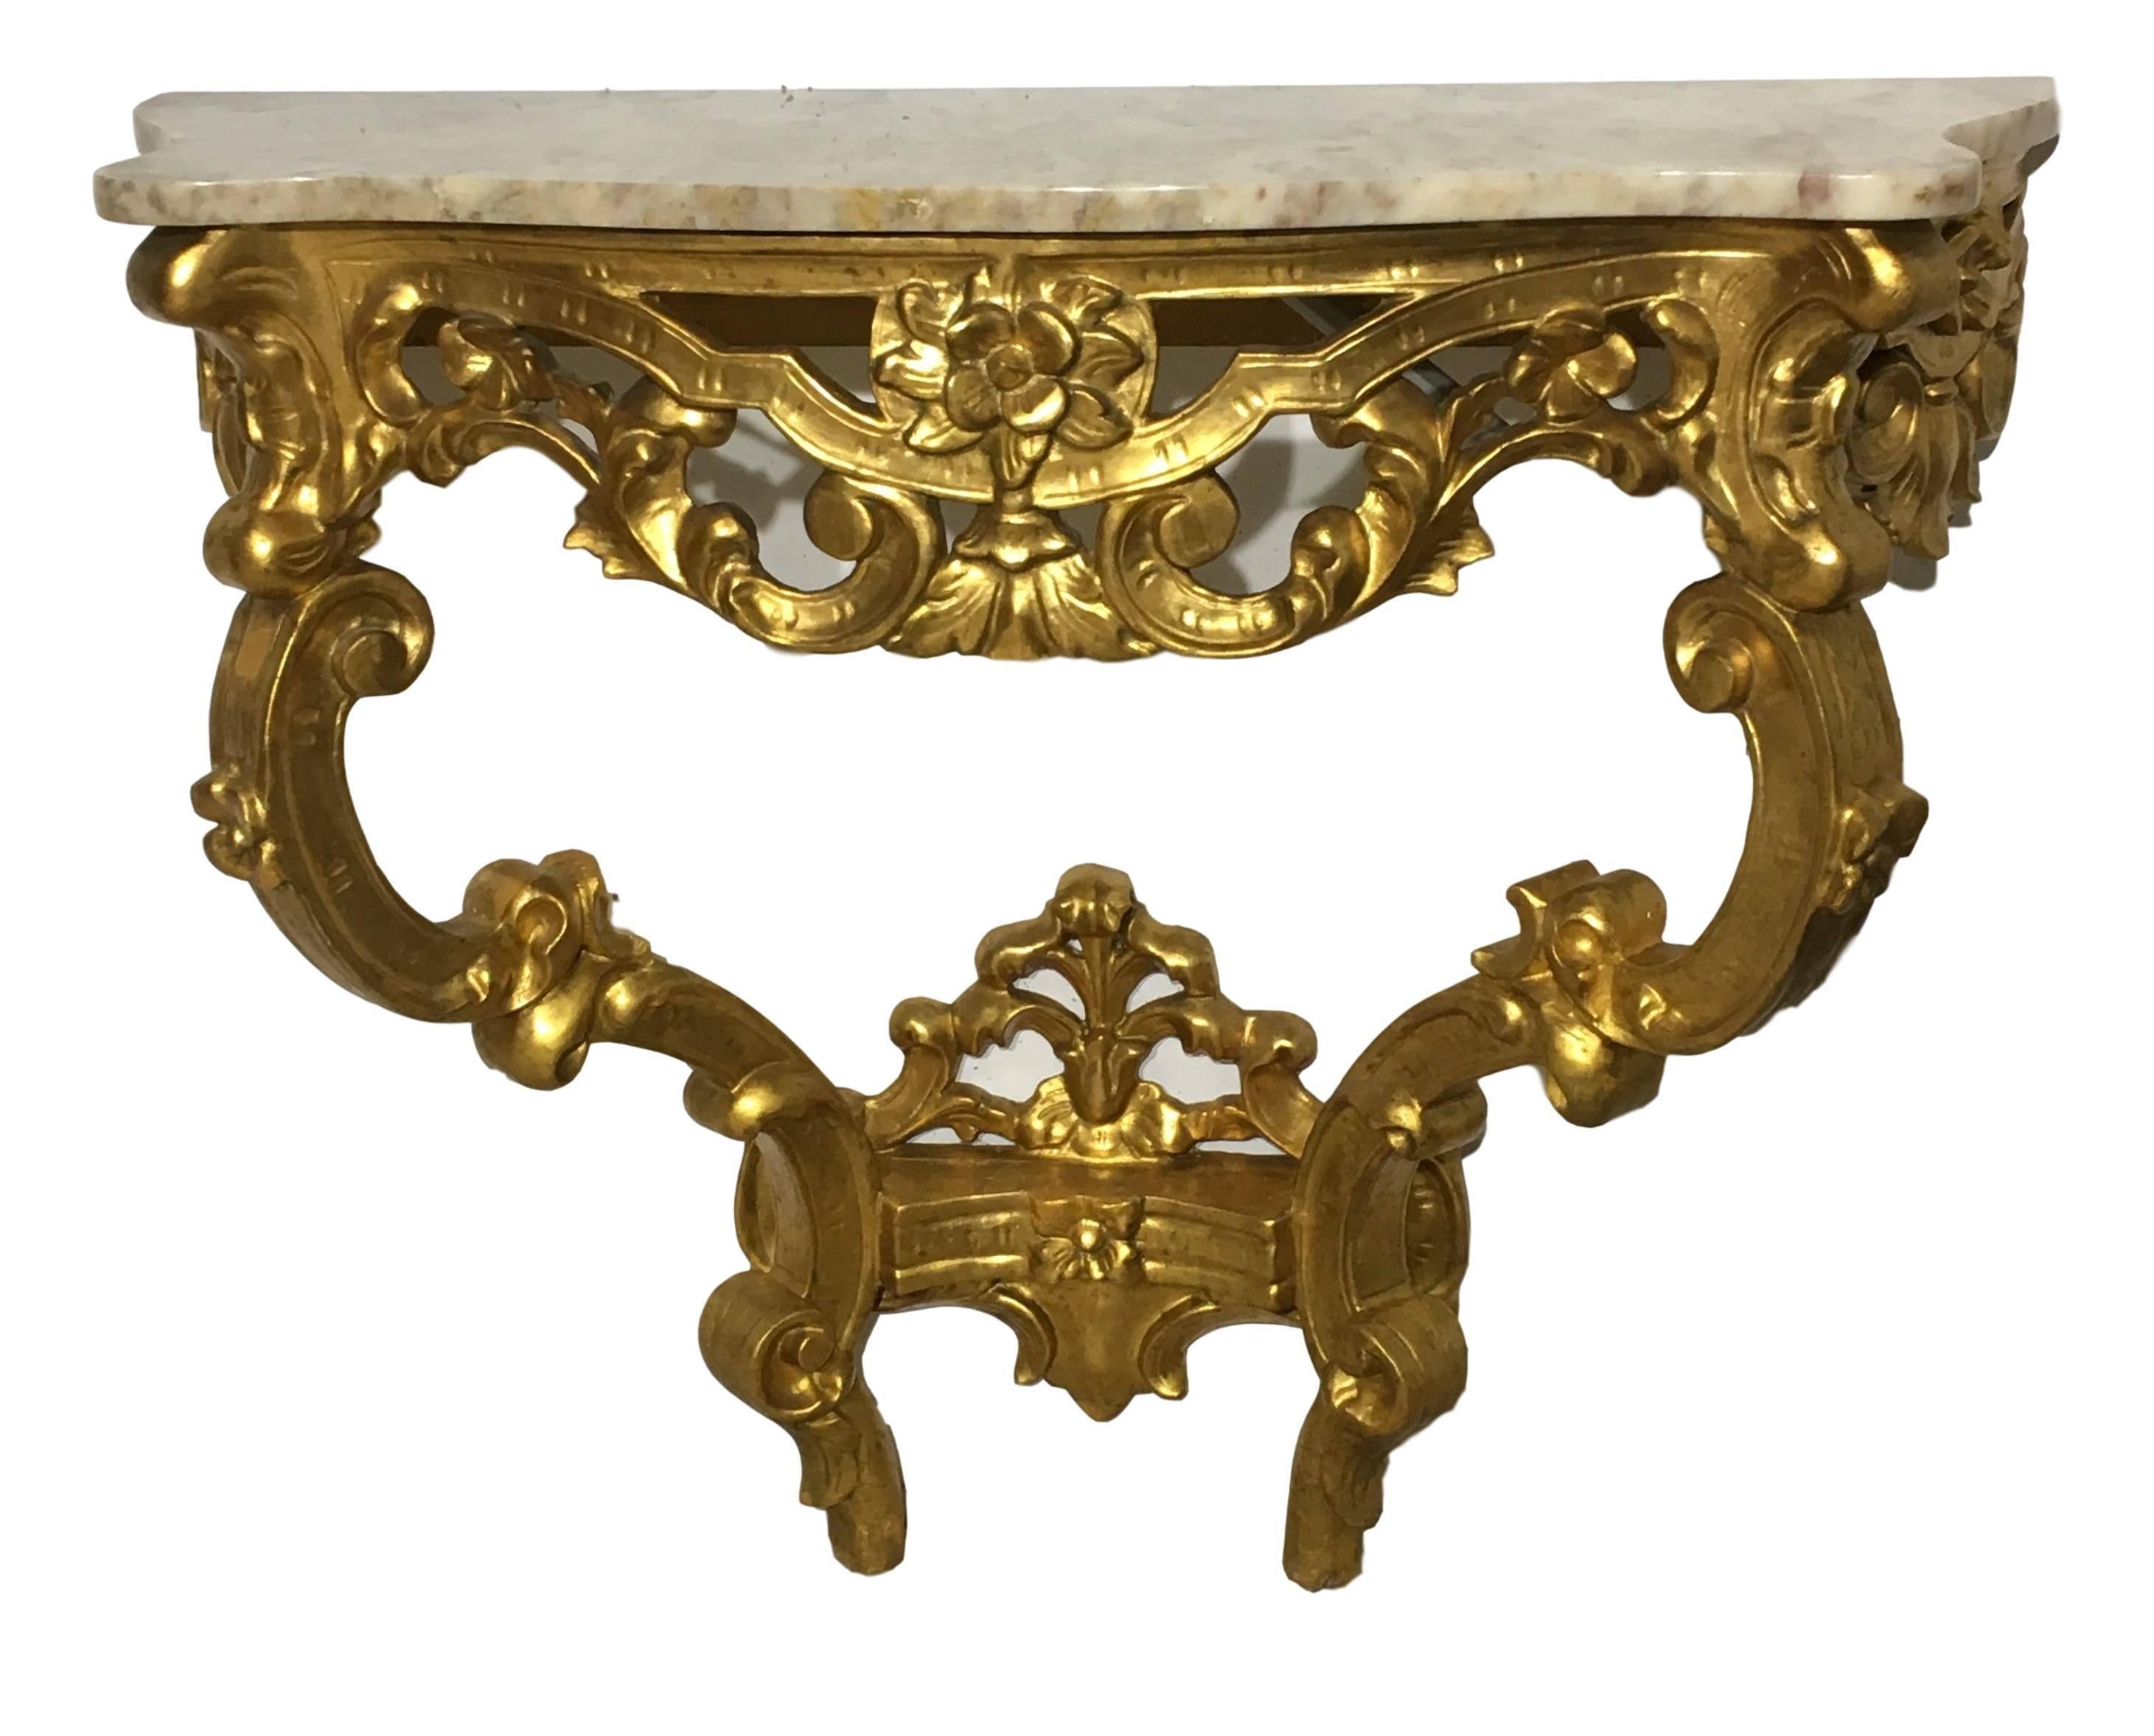 19th Century Italian Carved Giltwood Marble Top Console
Ornate gilded wood and beautiful marble with wonderful scale.
Elegant carved details include shell and leaf forms, flowers and other ornamentation
This piece actually has a matching mirror as